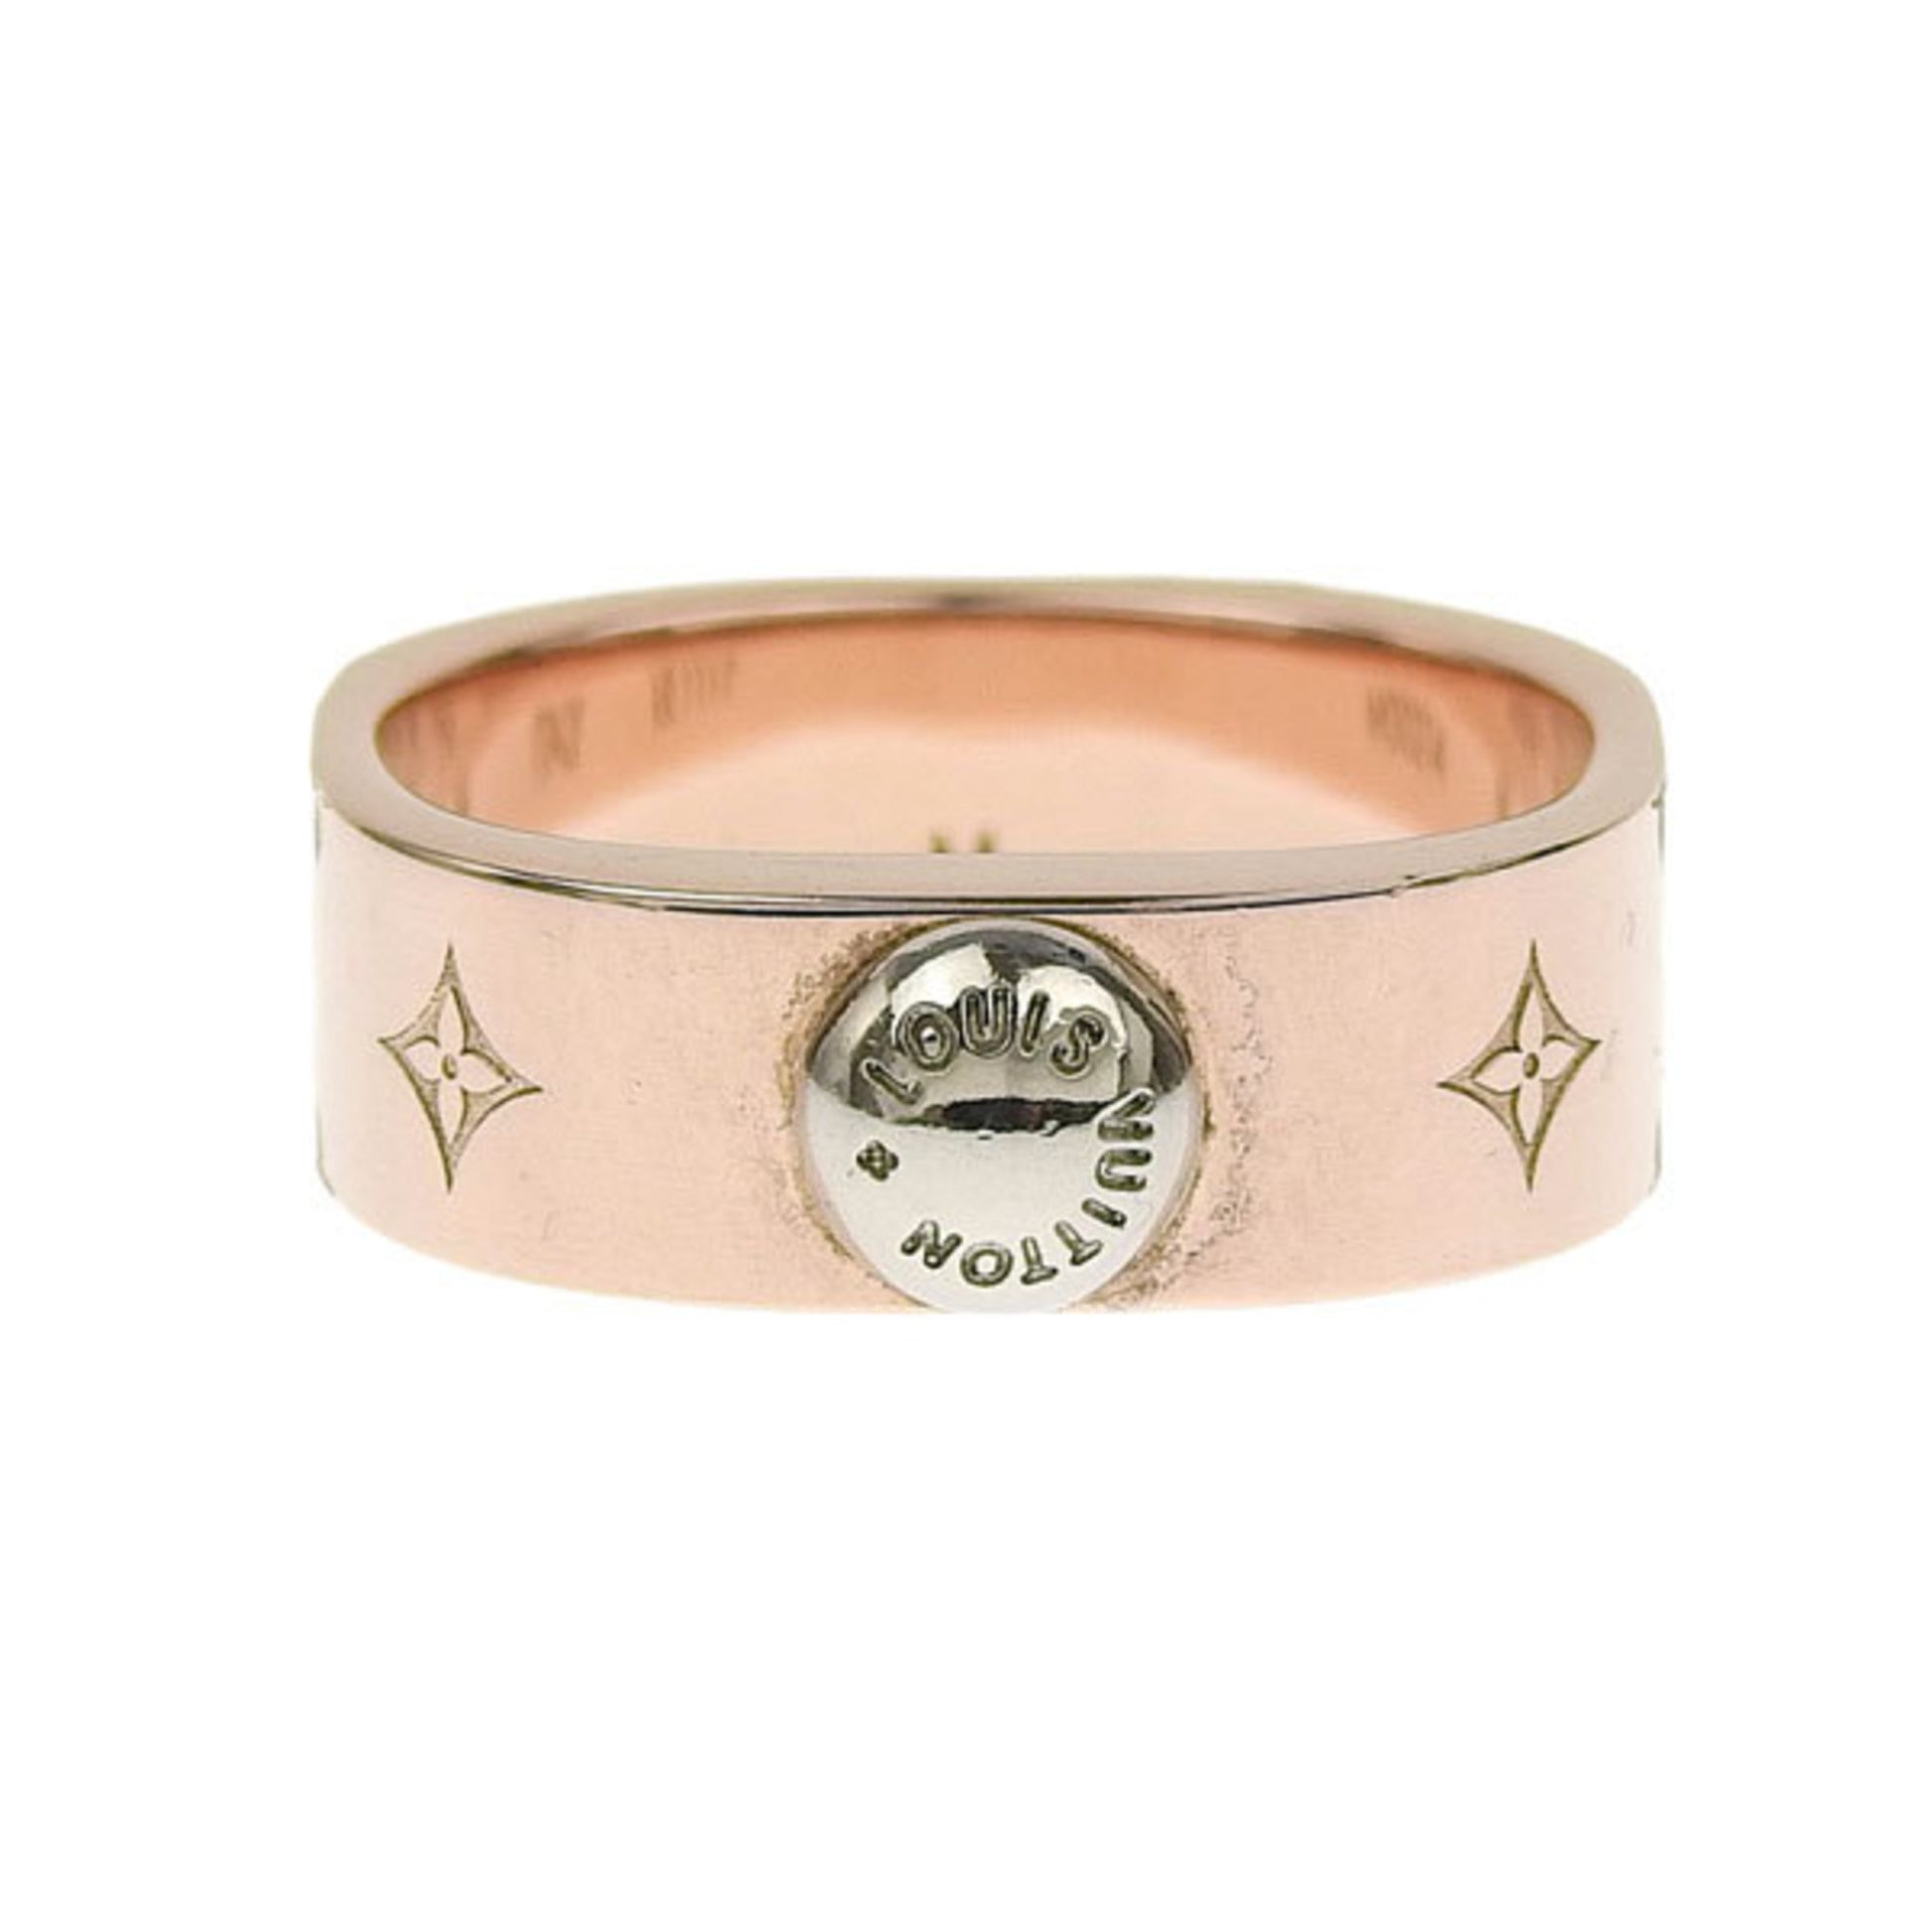 My lv ring Louis Vuitton Gold size 6 ¼ US in Metal - 23576343